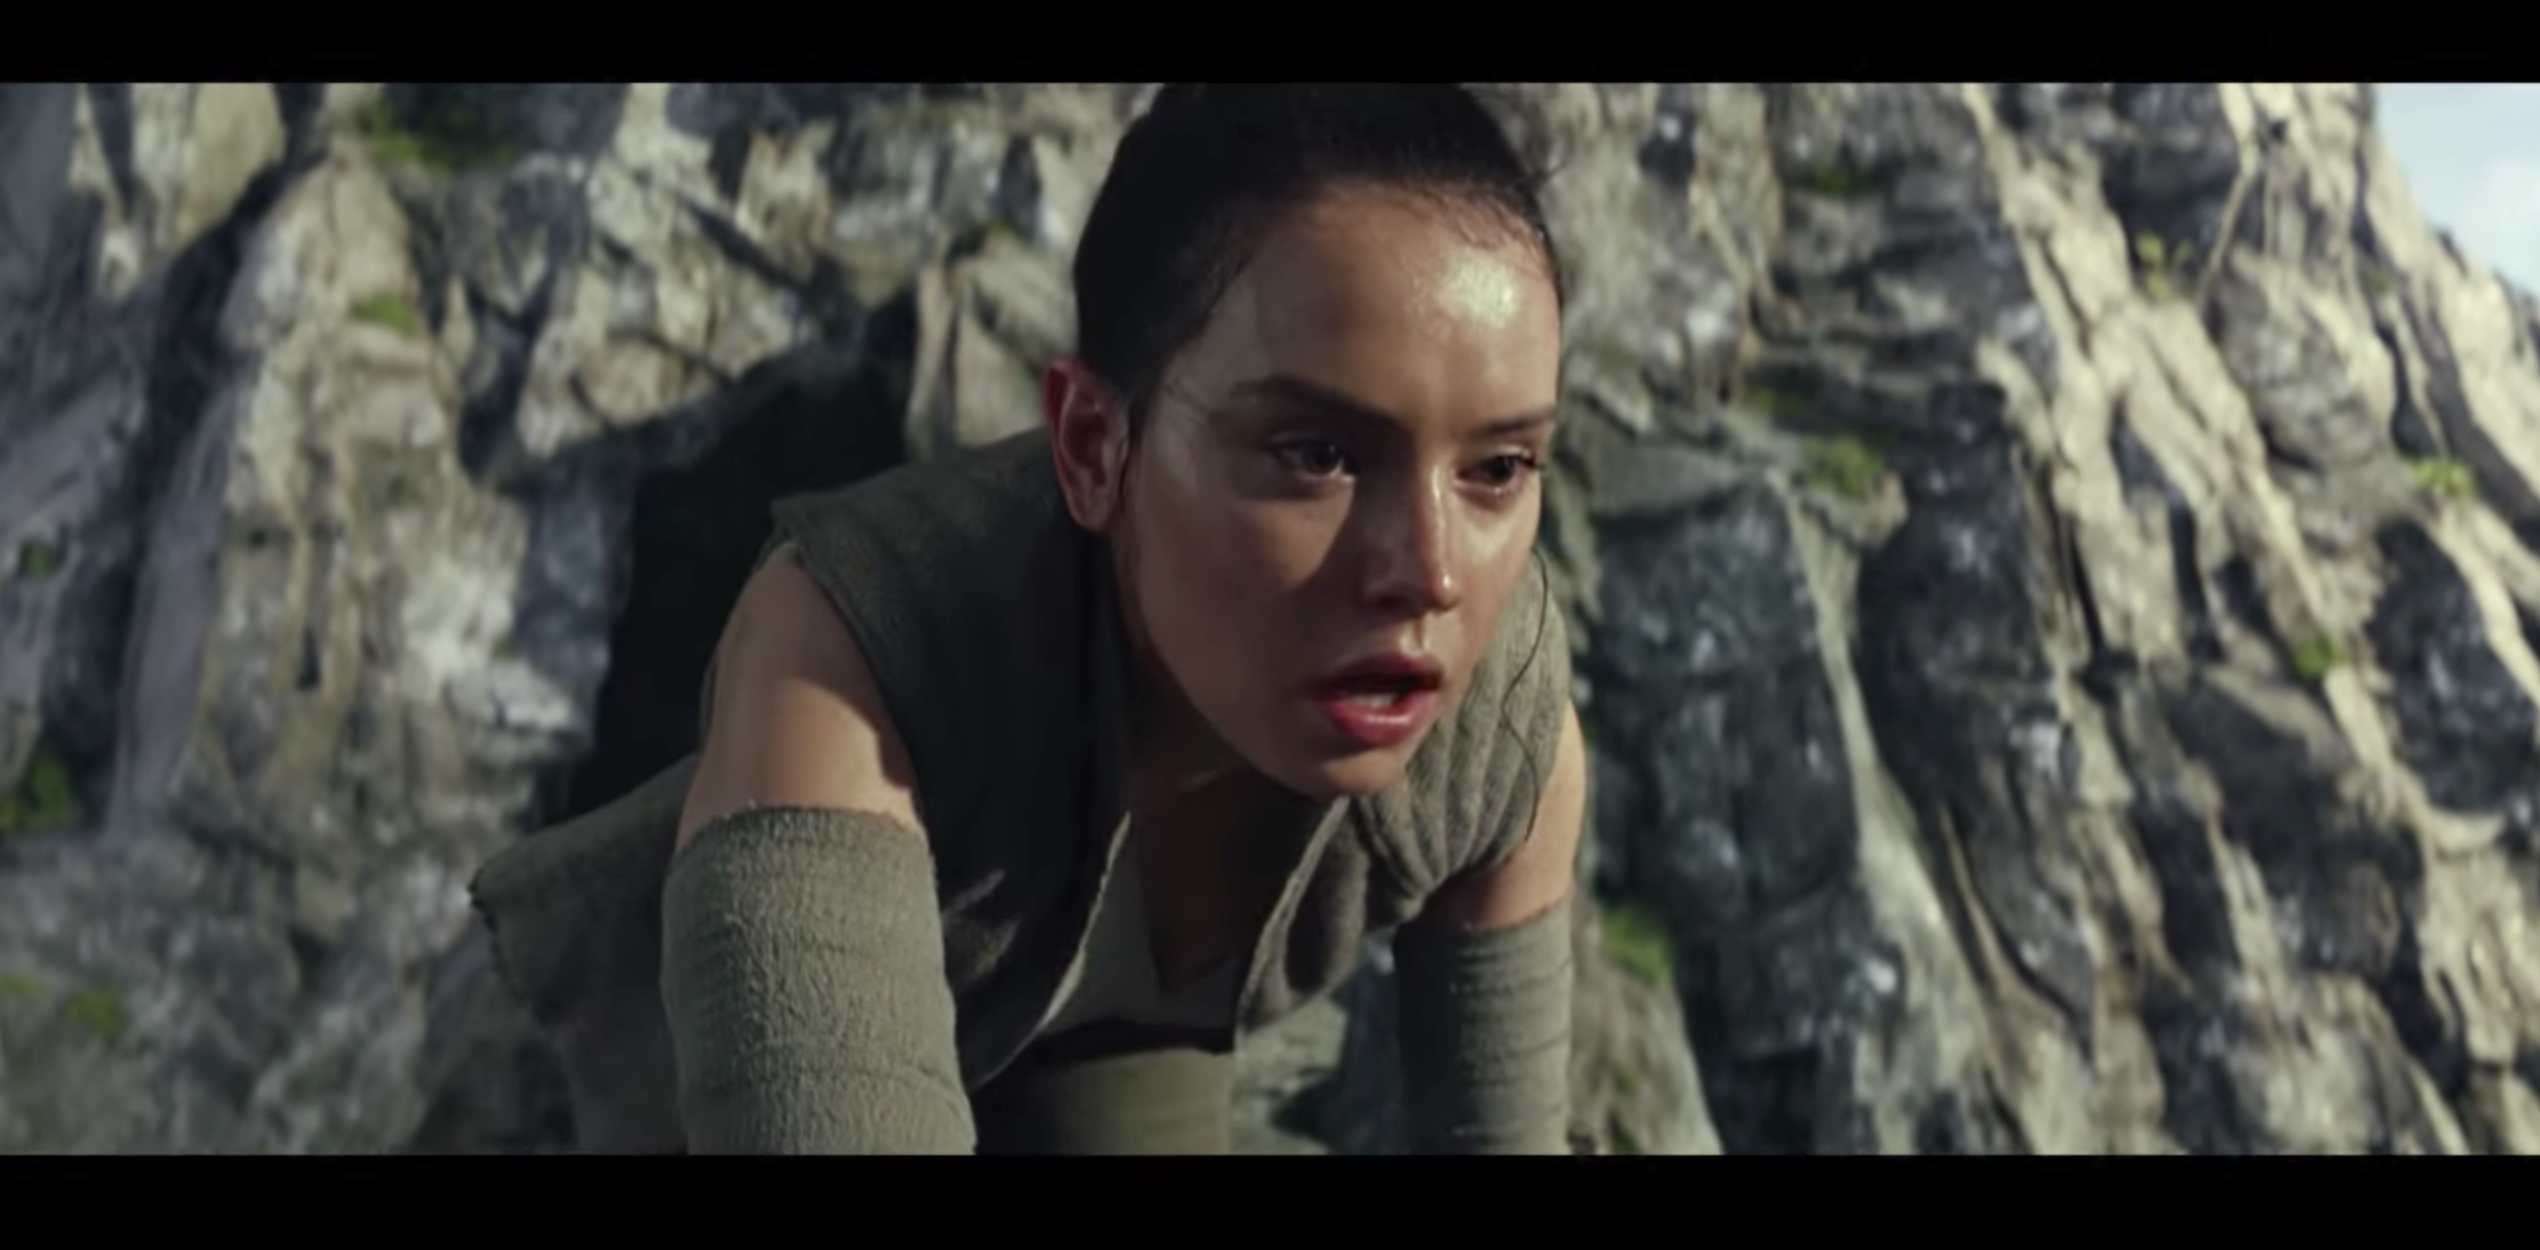 PHOTO: Daisy Ridley, as Rey, in a scene from "Star Wars: The Last Jedi."